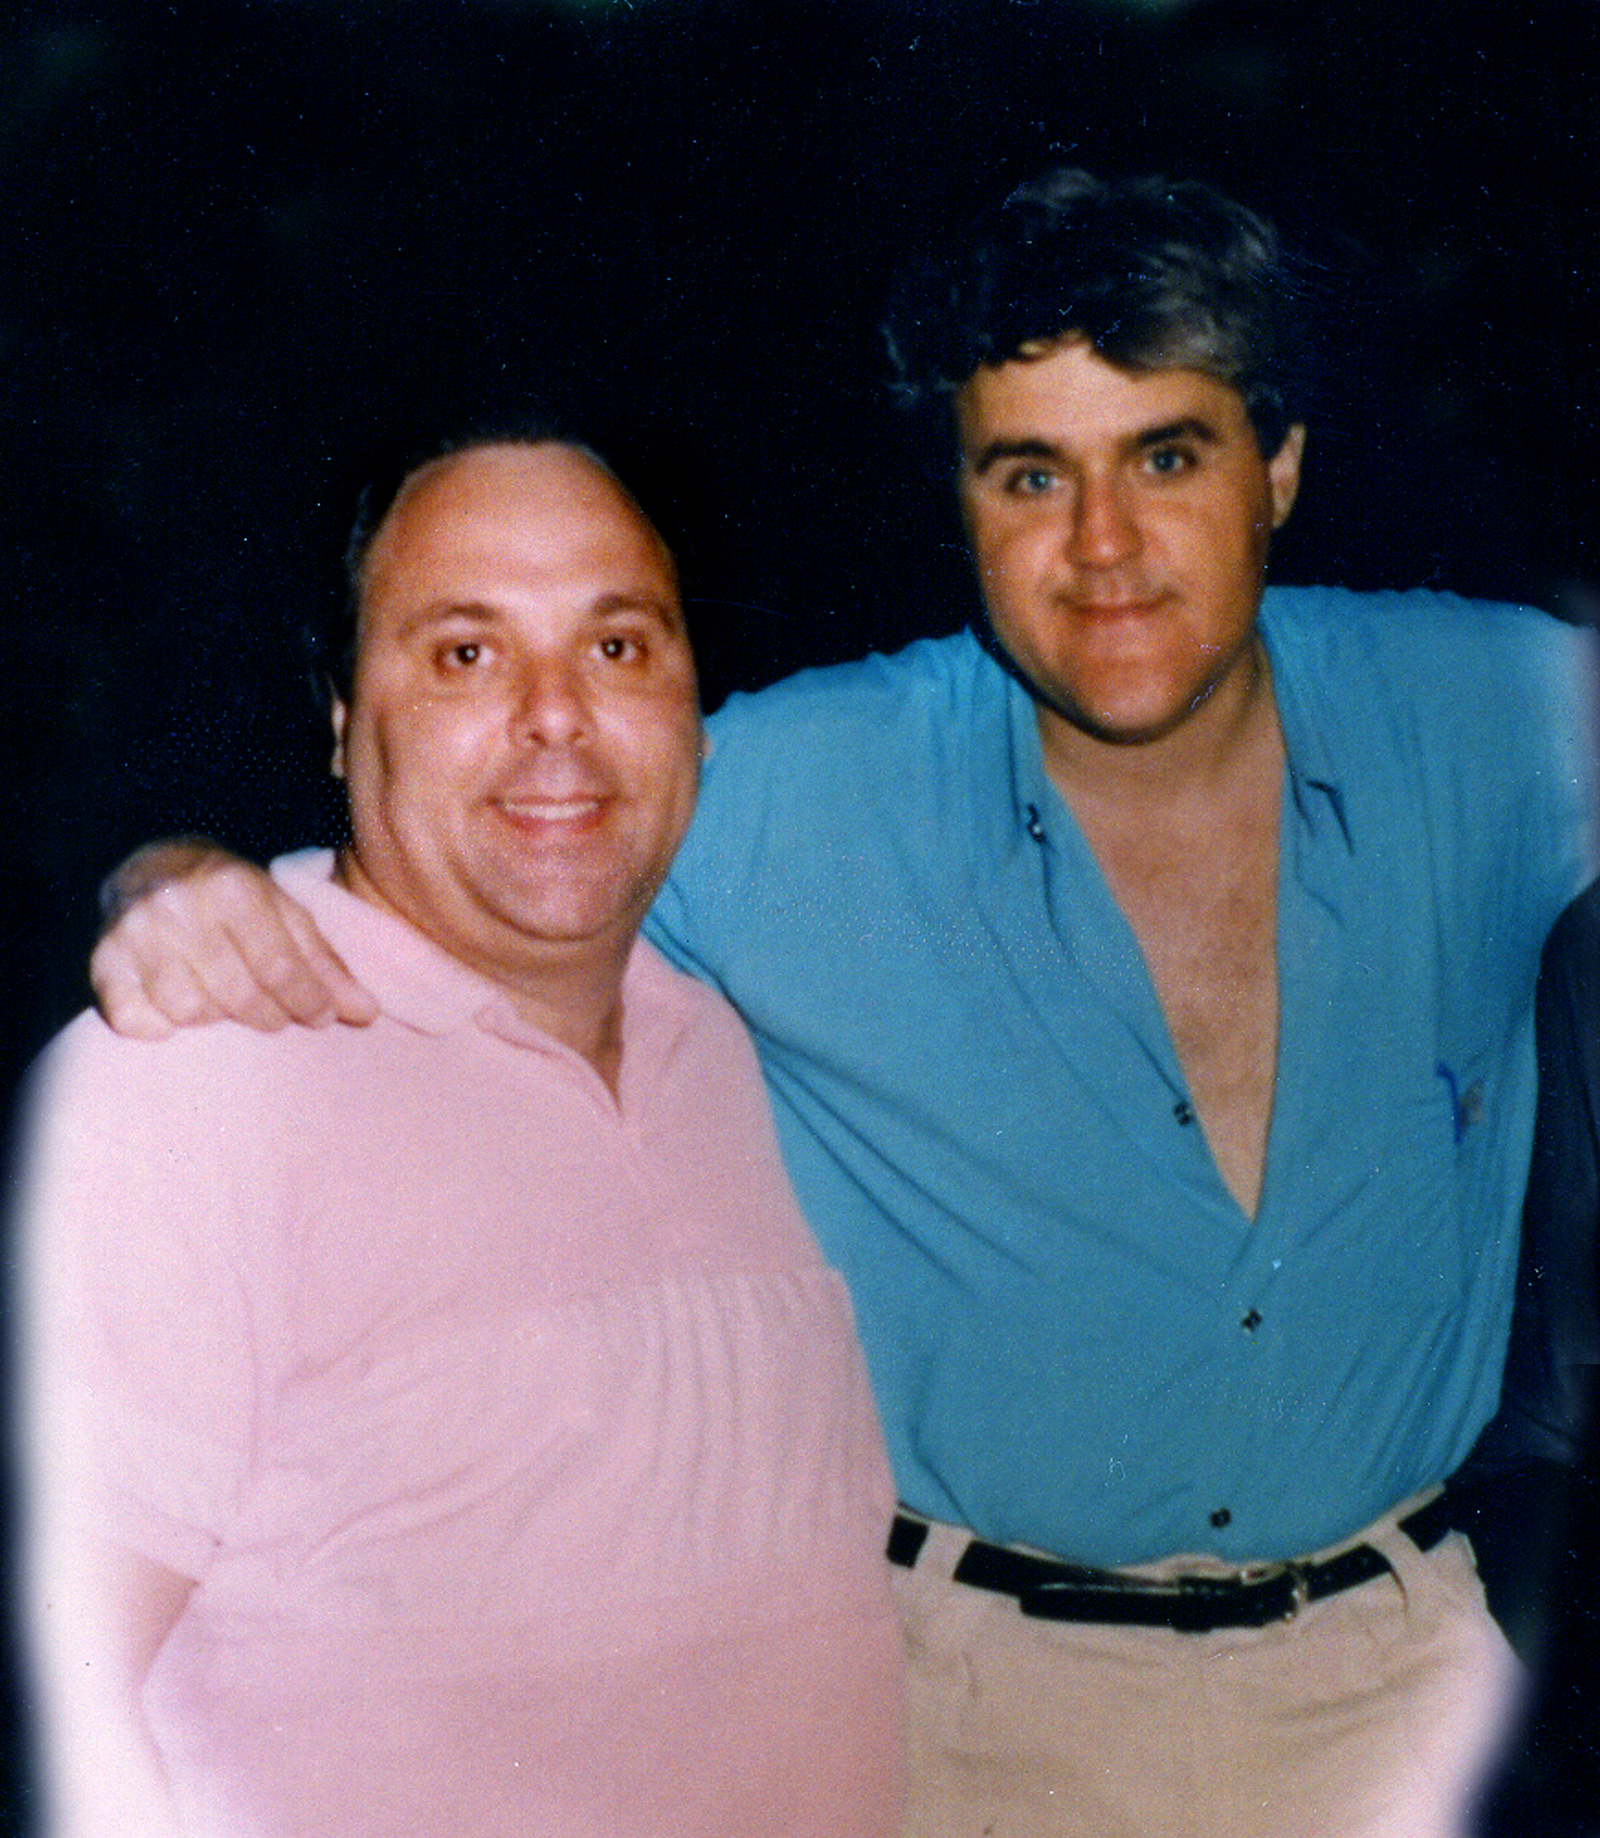 Frank Patton with Jay Leno in 